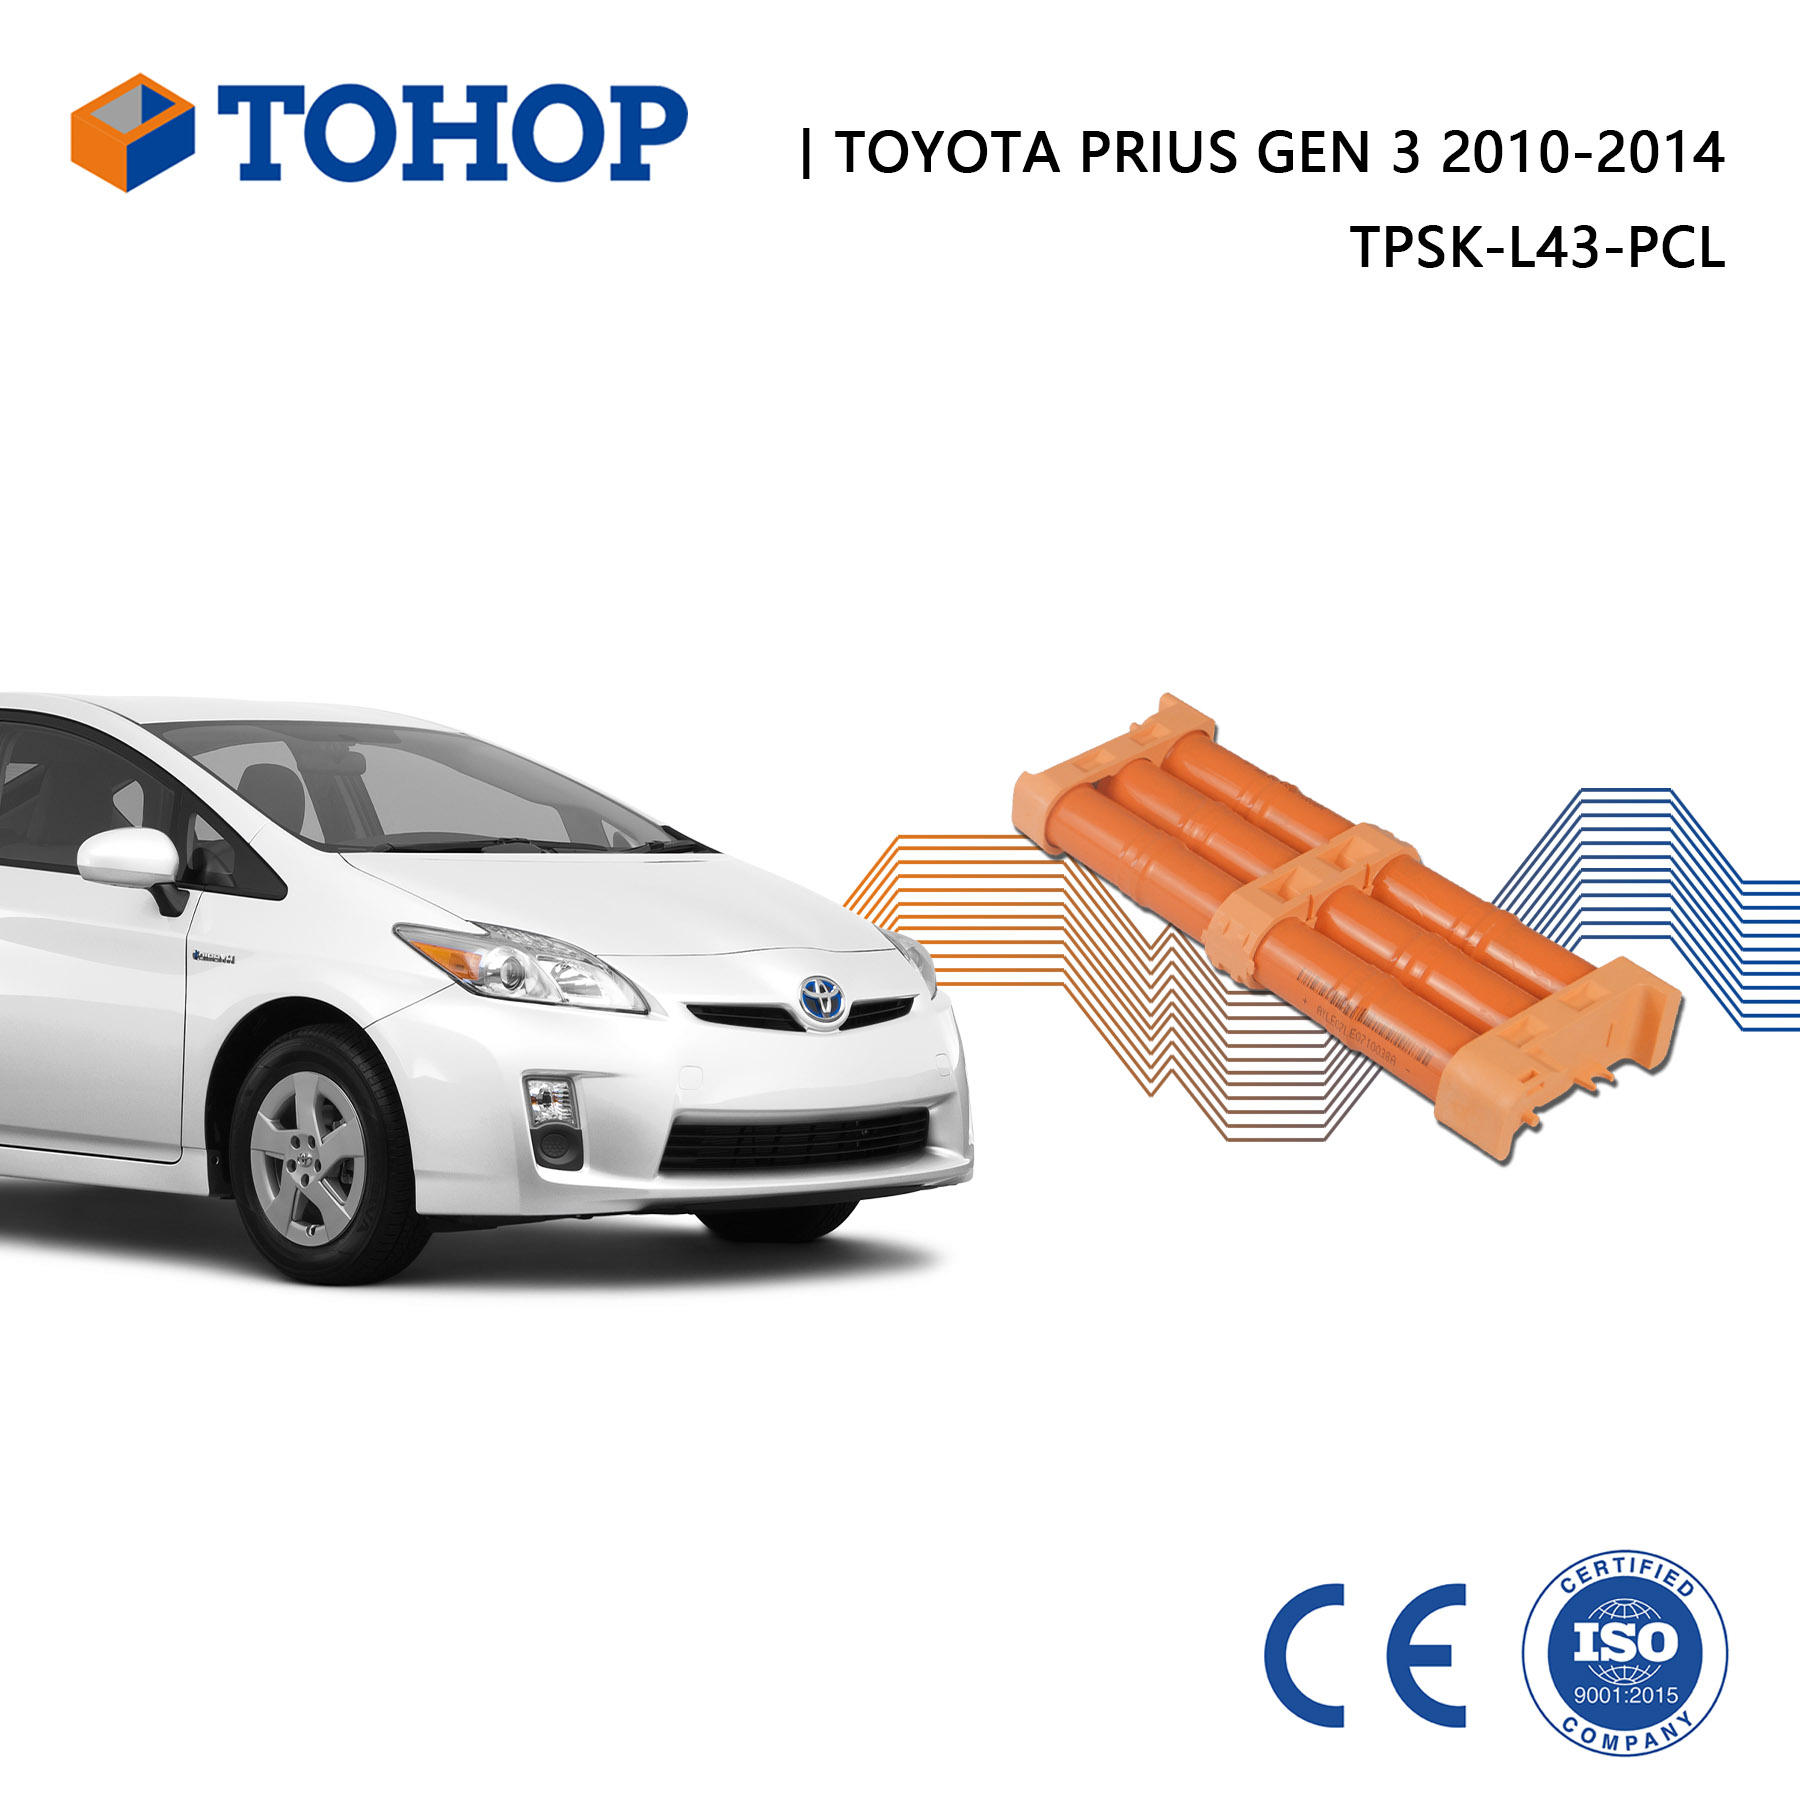 Prius Gen 3 Toyota Hybrid Battery Replacement 14.4V 6.5Ah Nimh Cell